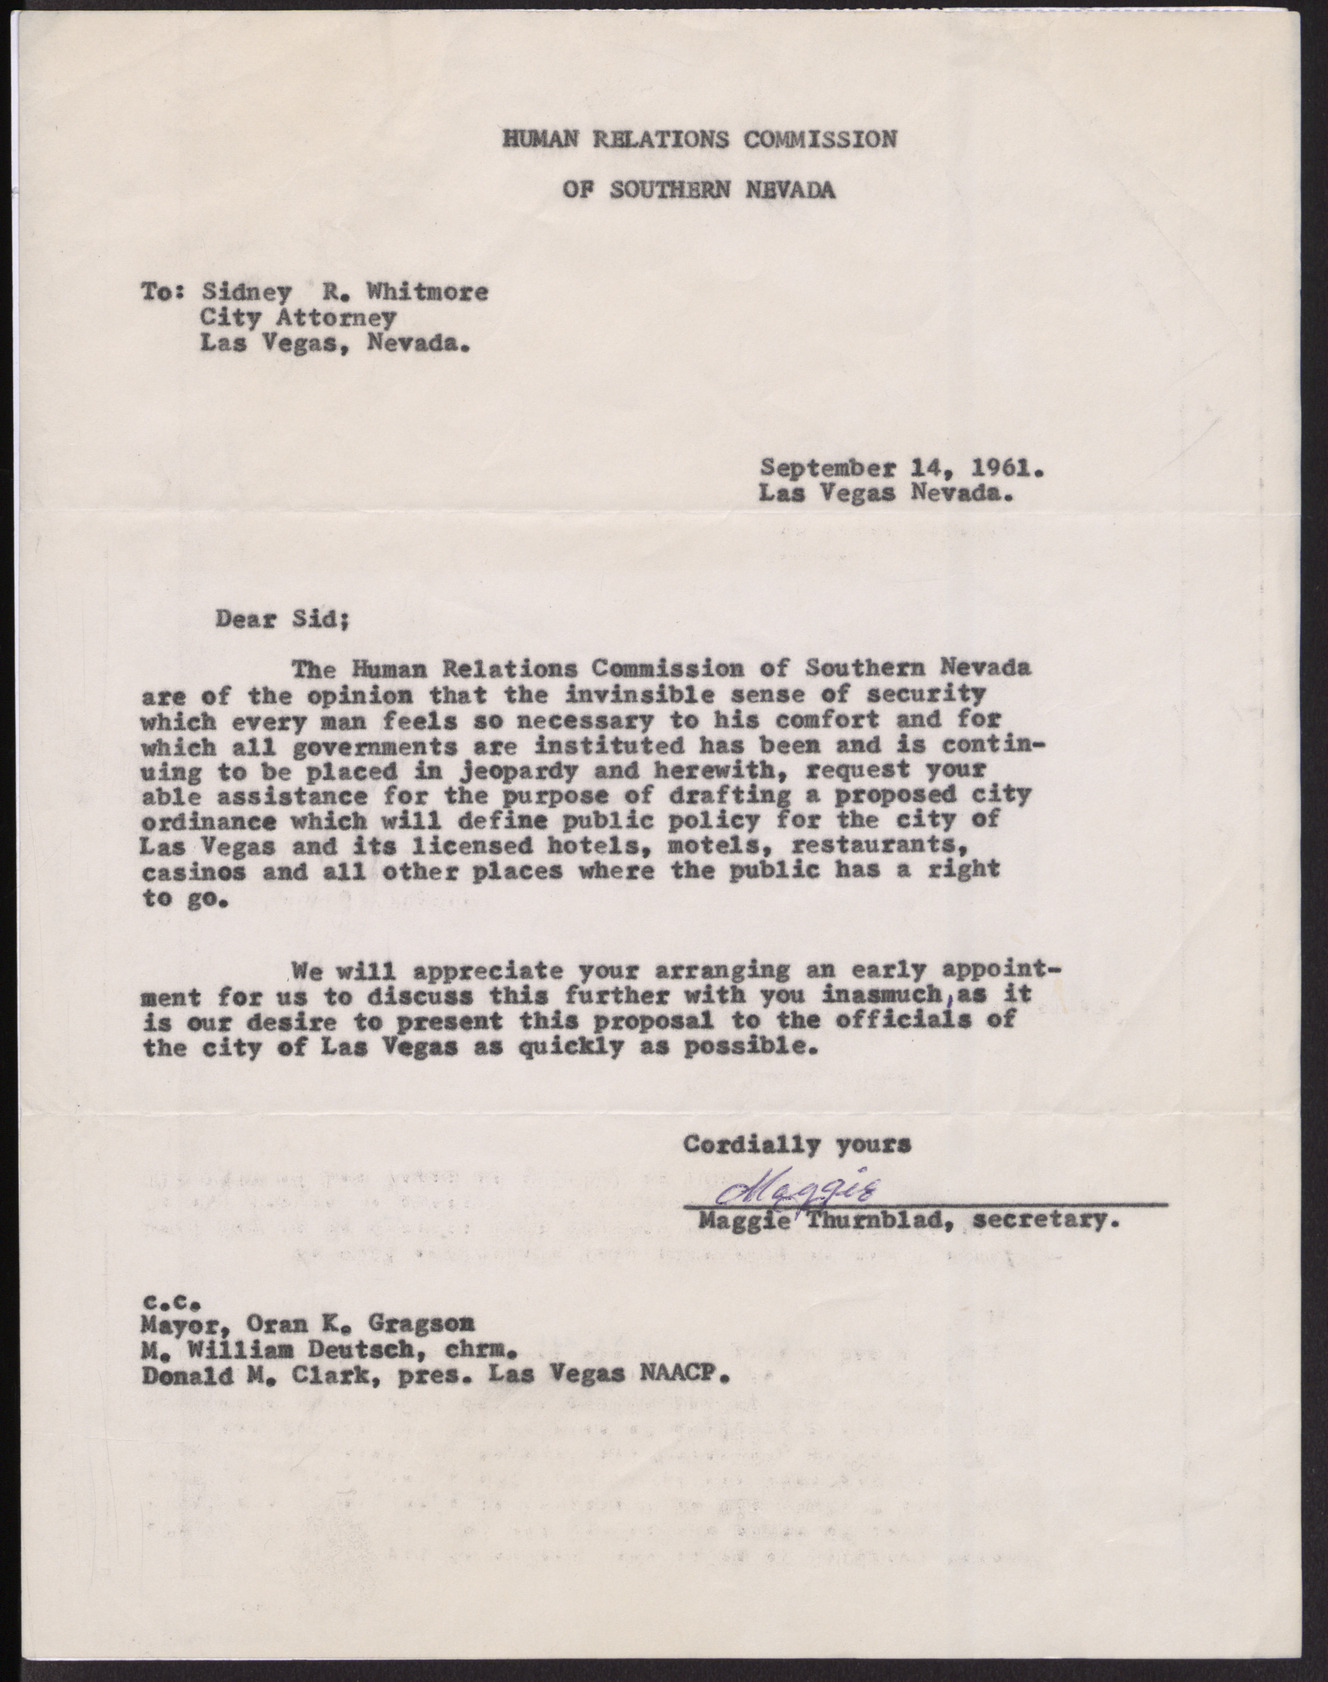 Letter to Sidney R. Whitmore from Maggie Thurnblad, September 14, 1961